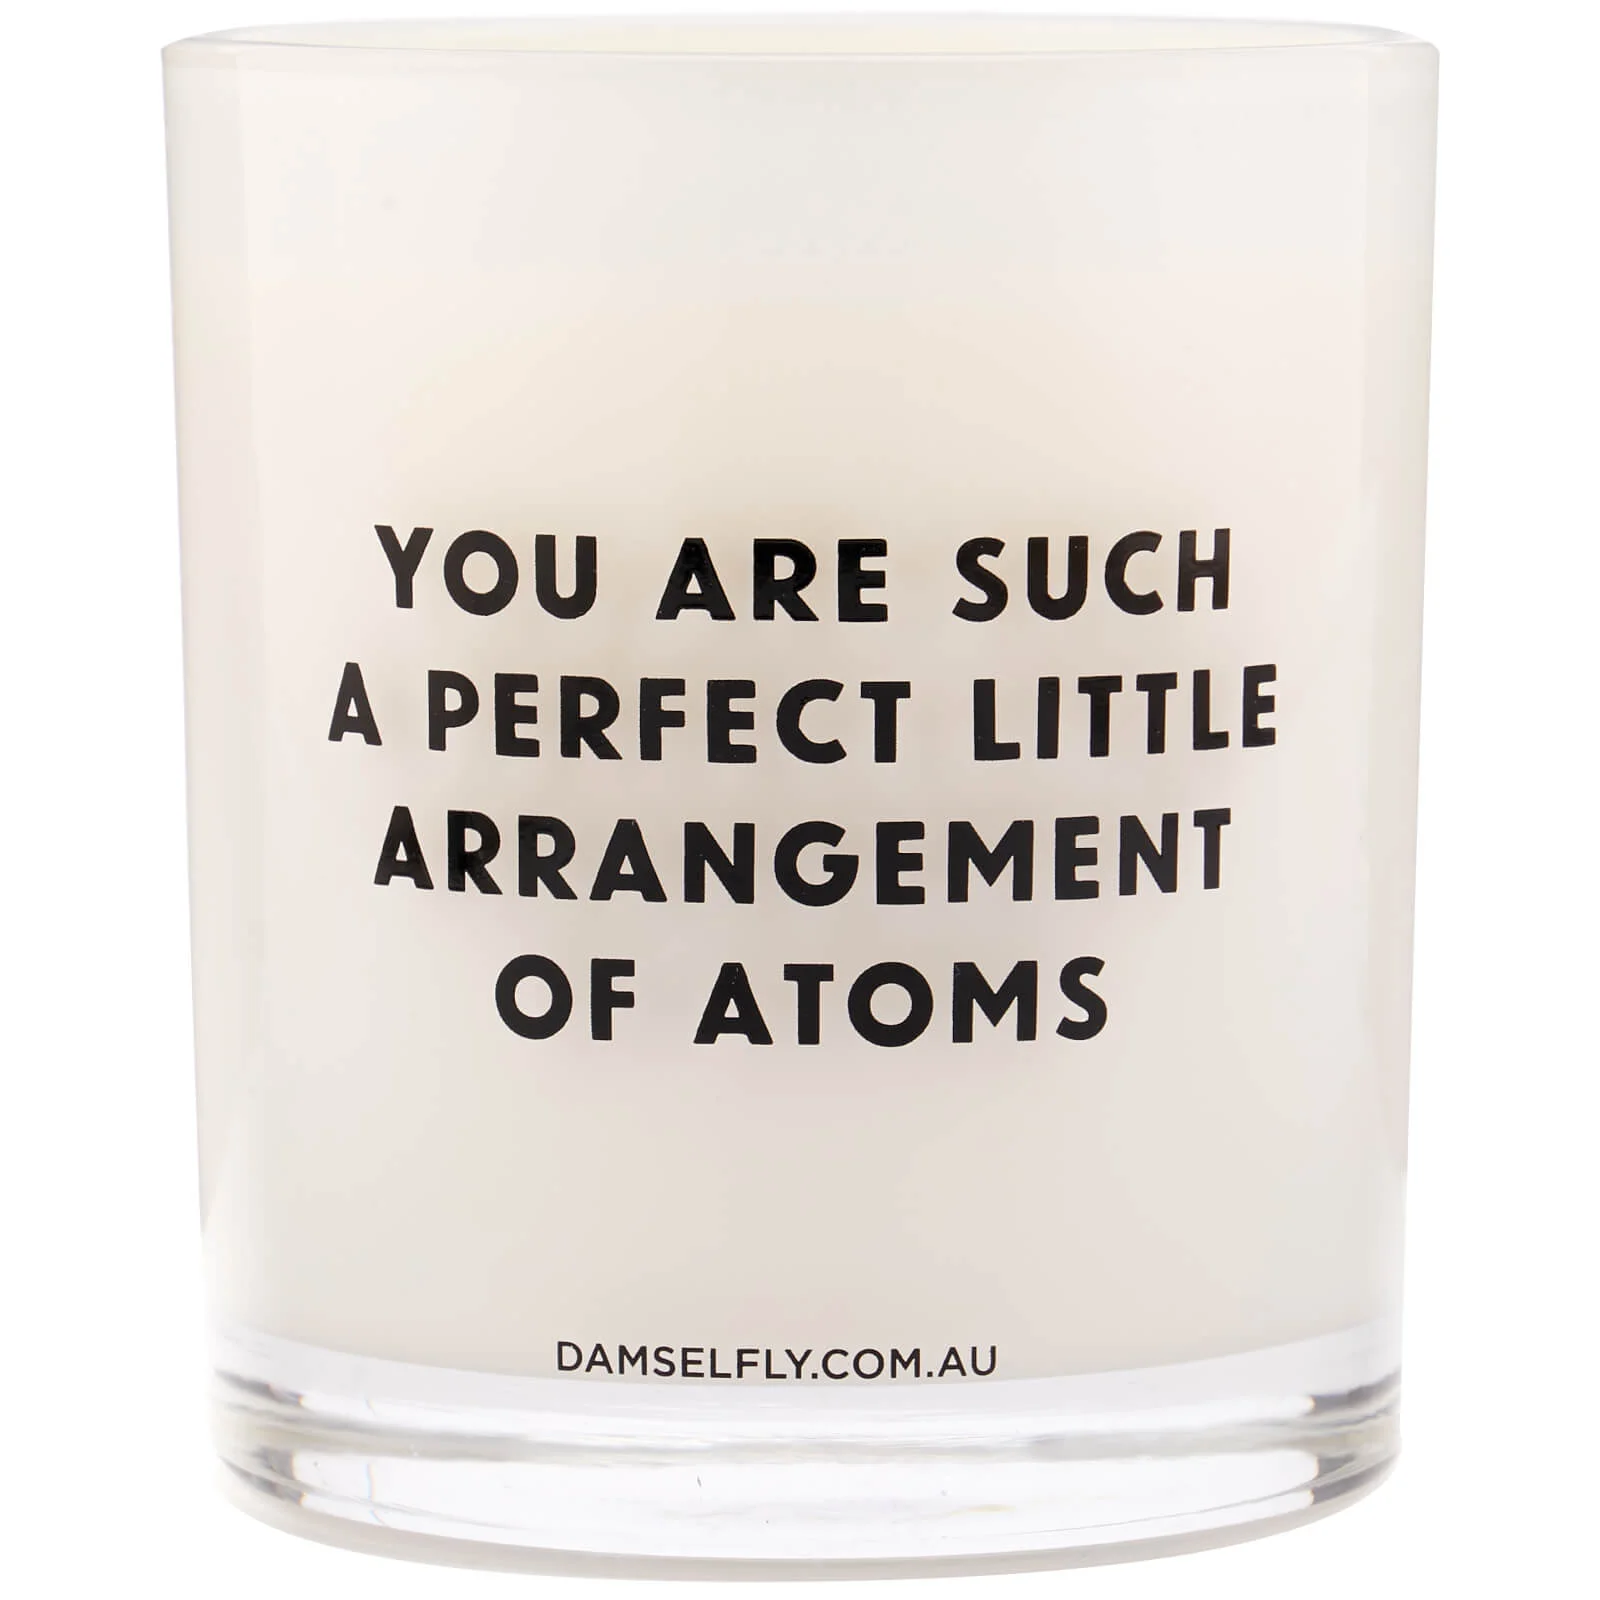 Damselfly Arrangement of Atoms Candle 450g Image 1